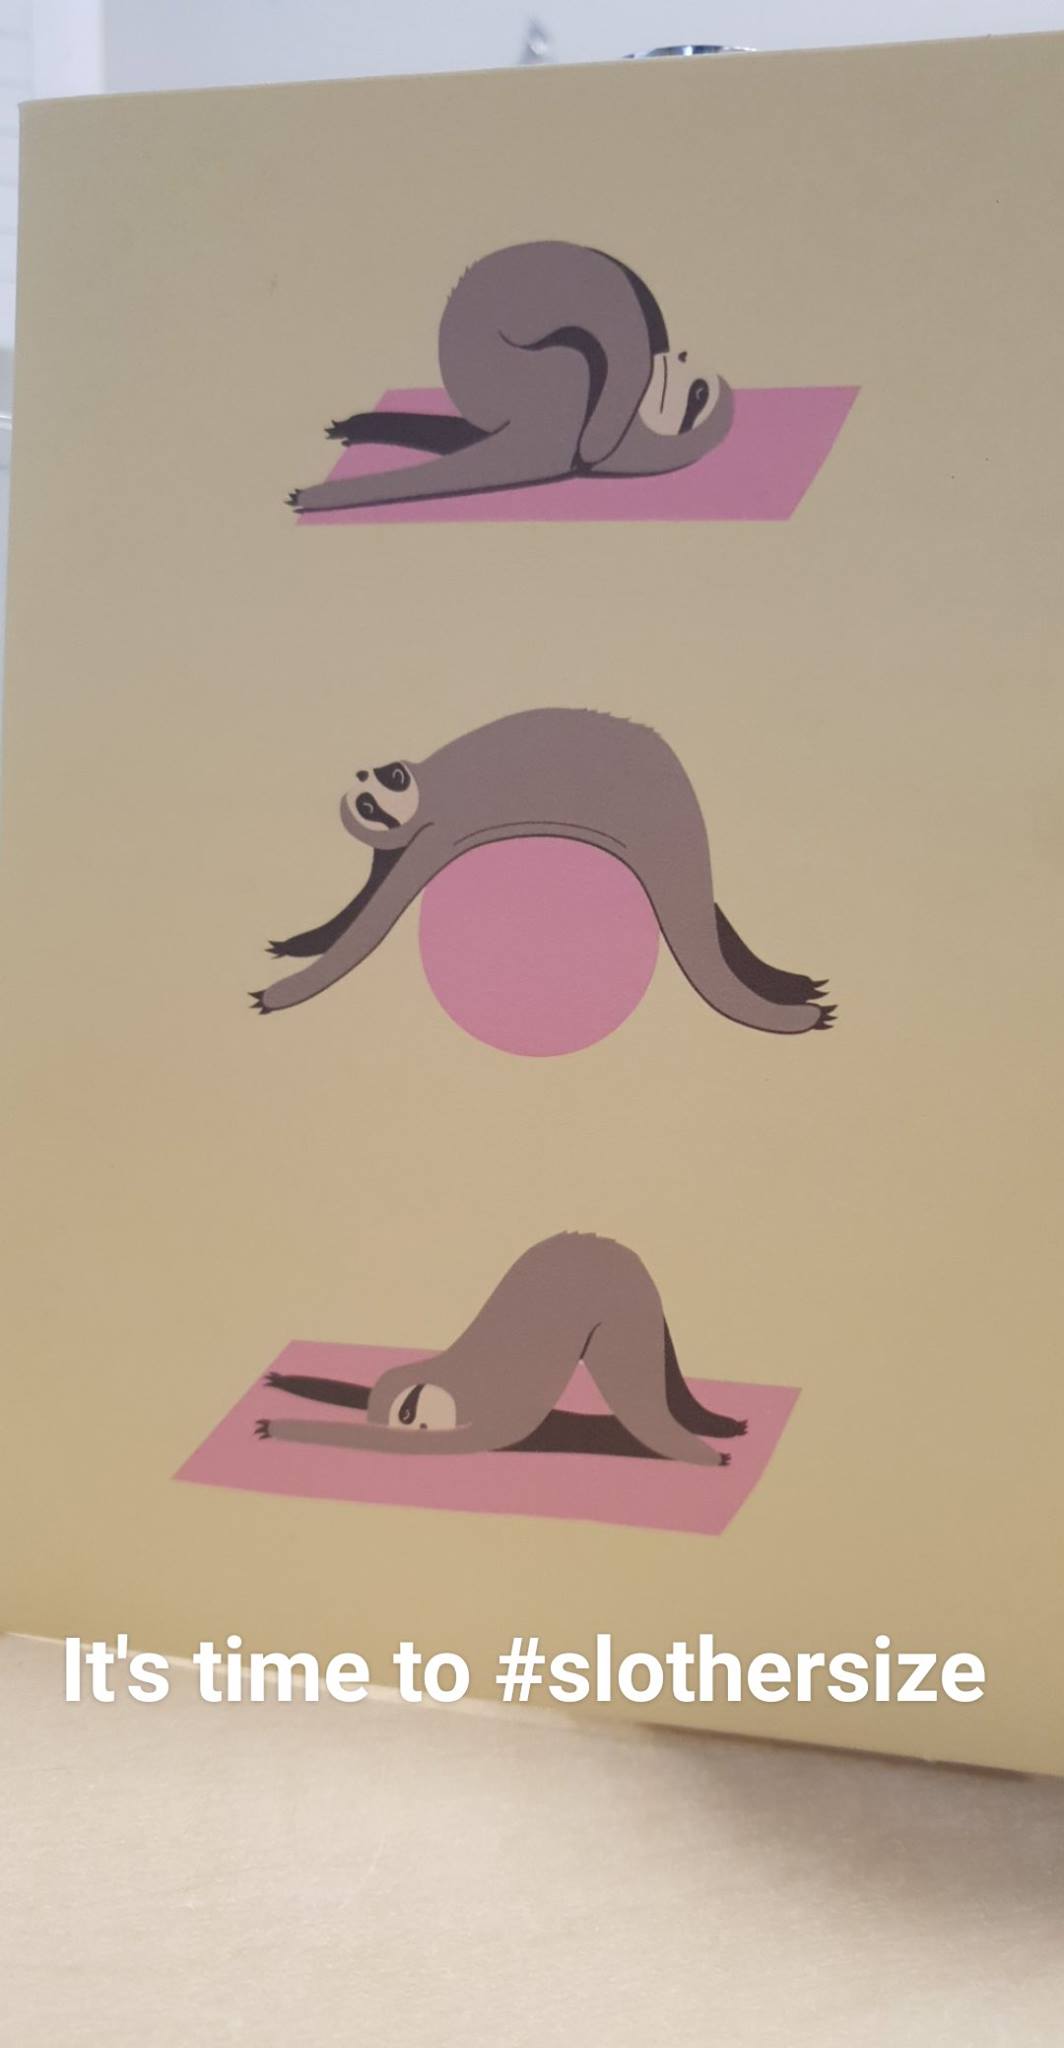 a comic illustration of a sloth on a yoga matt doing 3 different very relaxed poses